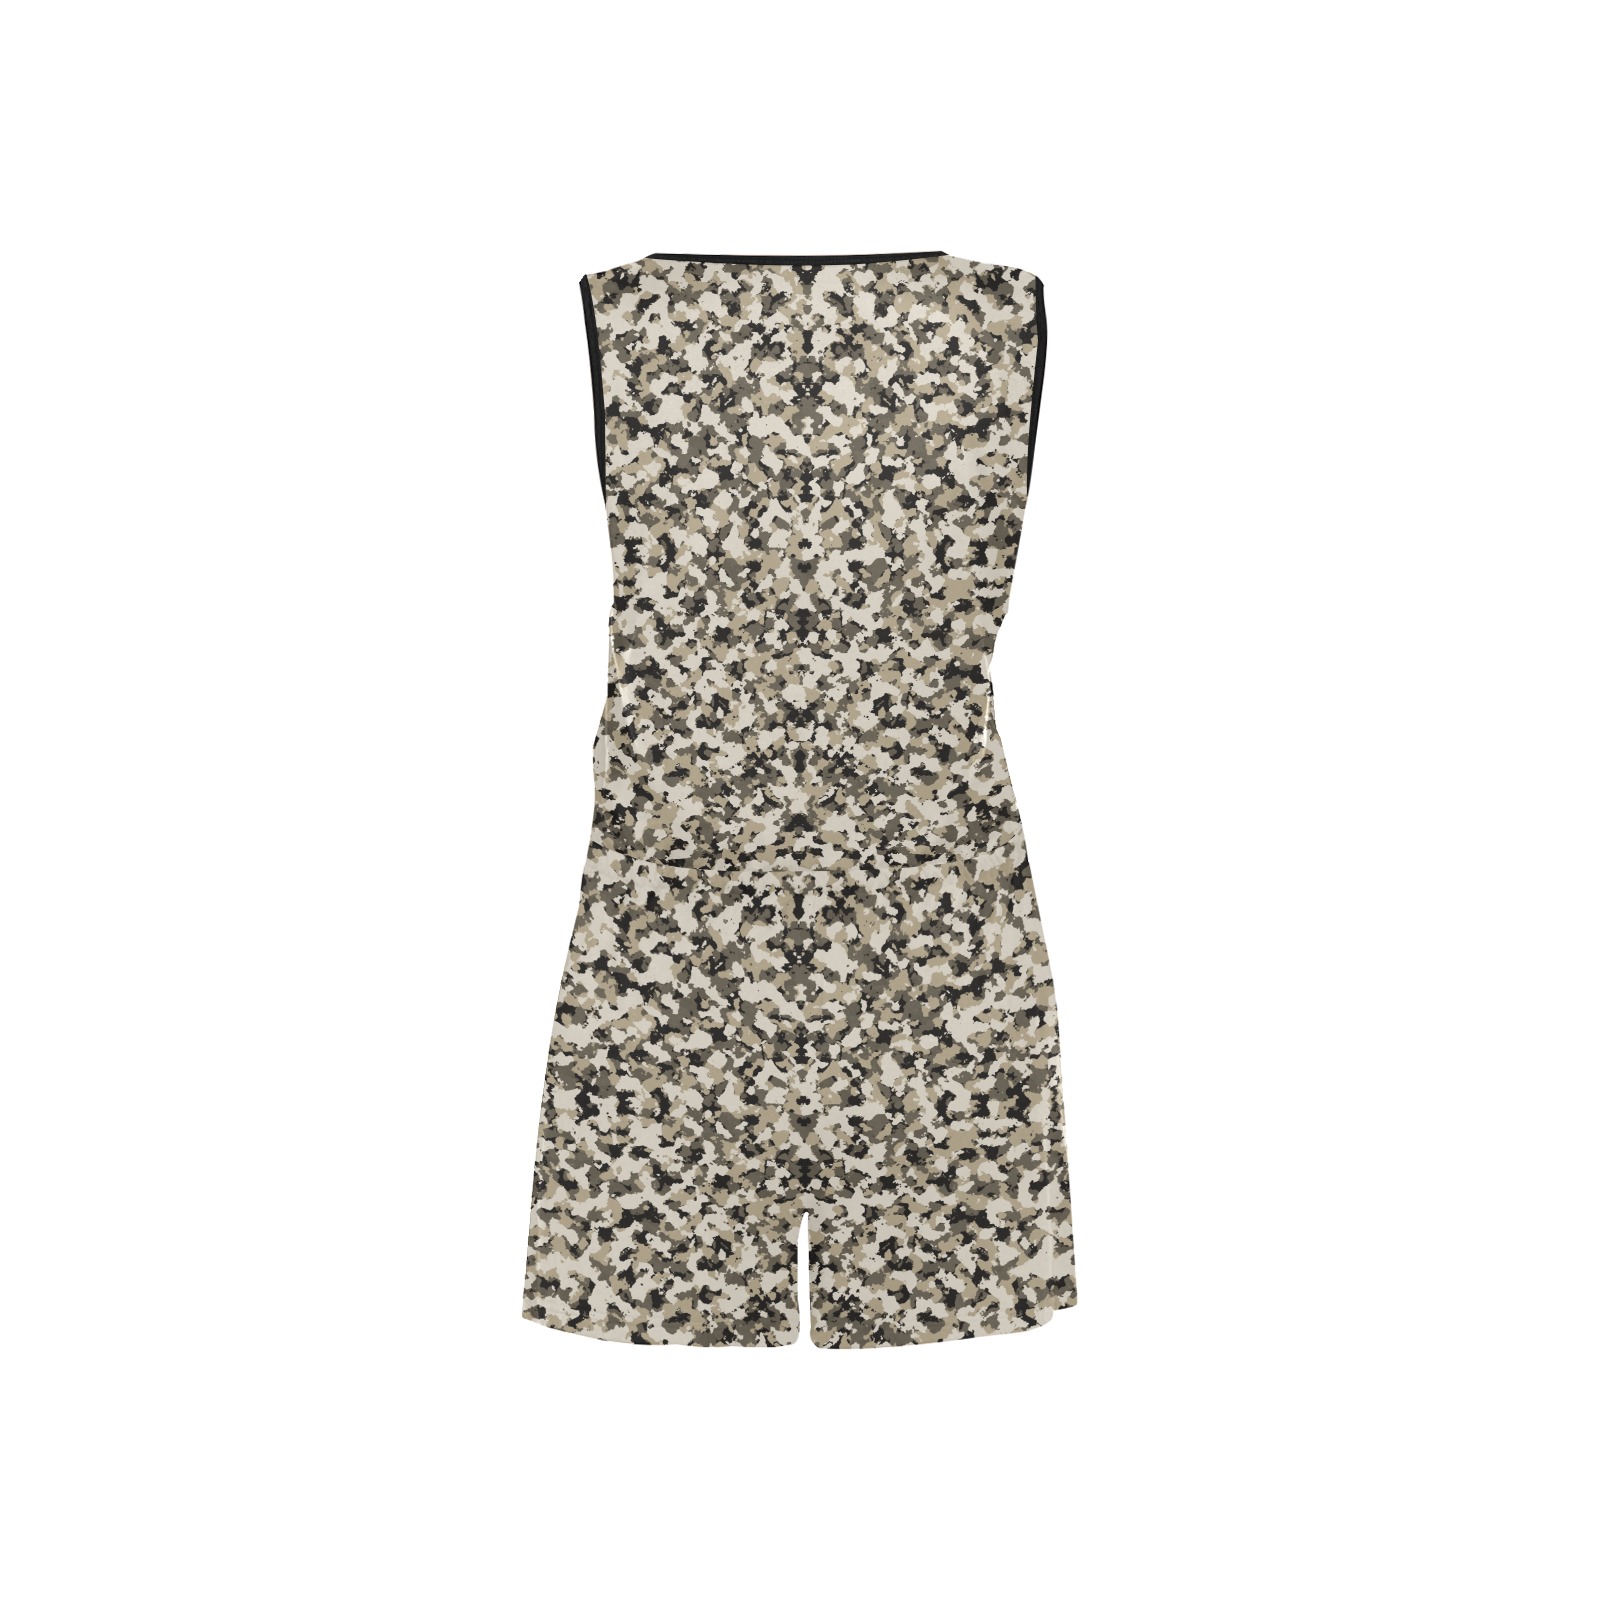 Sand camo All Over Print Short Jumpsuit